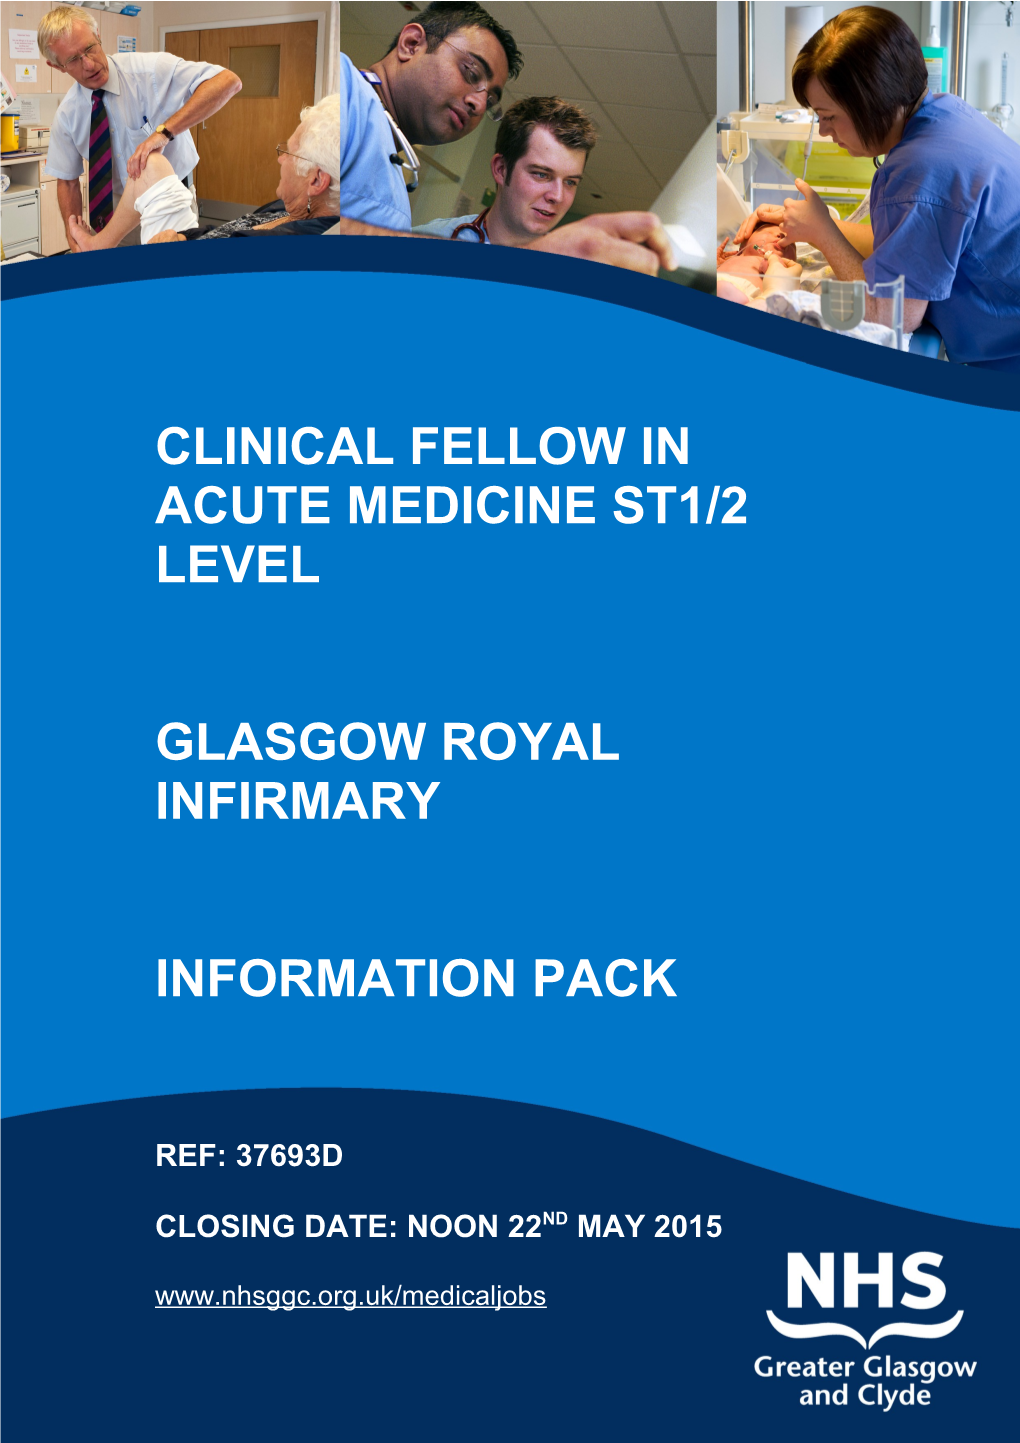 Clinical Fellow in Acute Medicine St1/2 Level